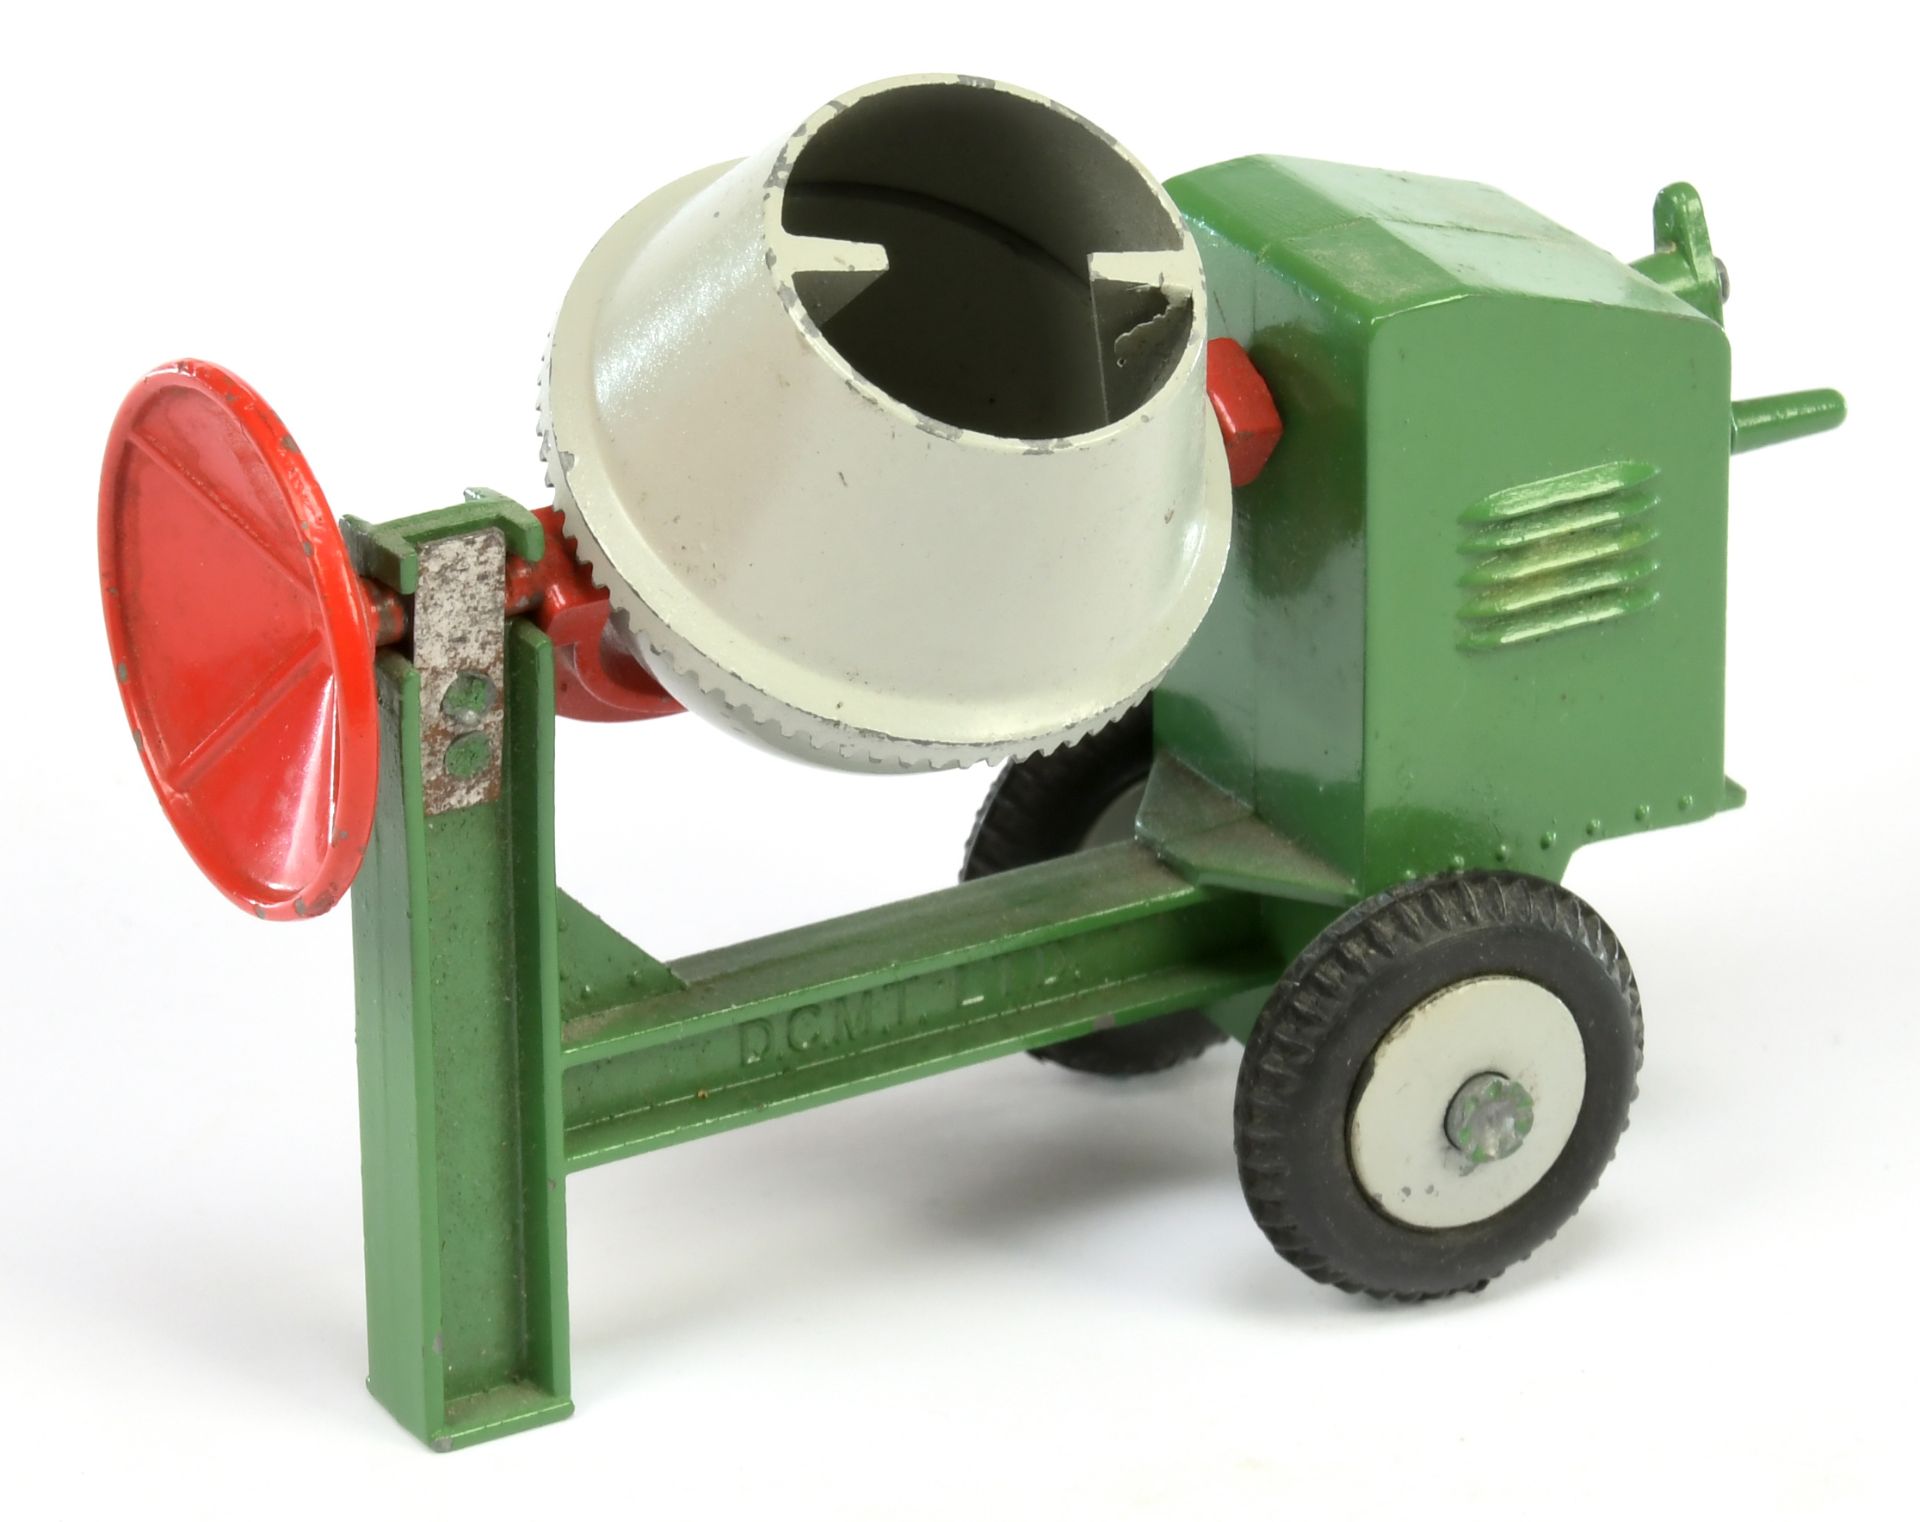 DCMT LTD Cement Mixer - Green, grey mixer and hubs, red including handle - Image 2 of 2